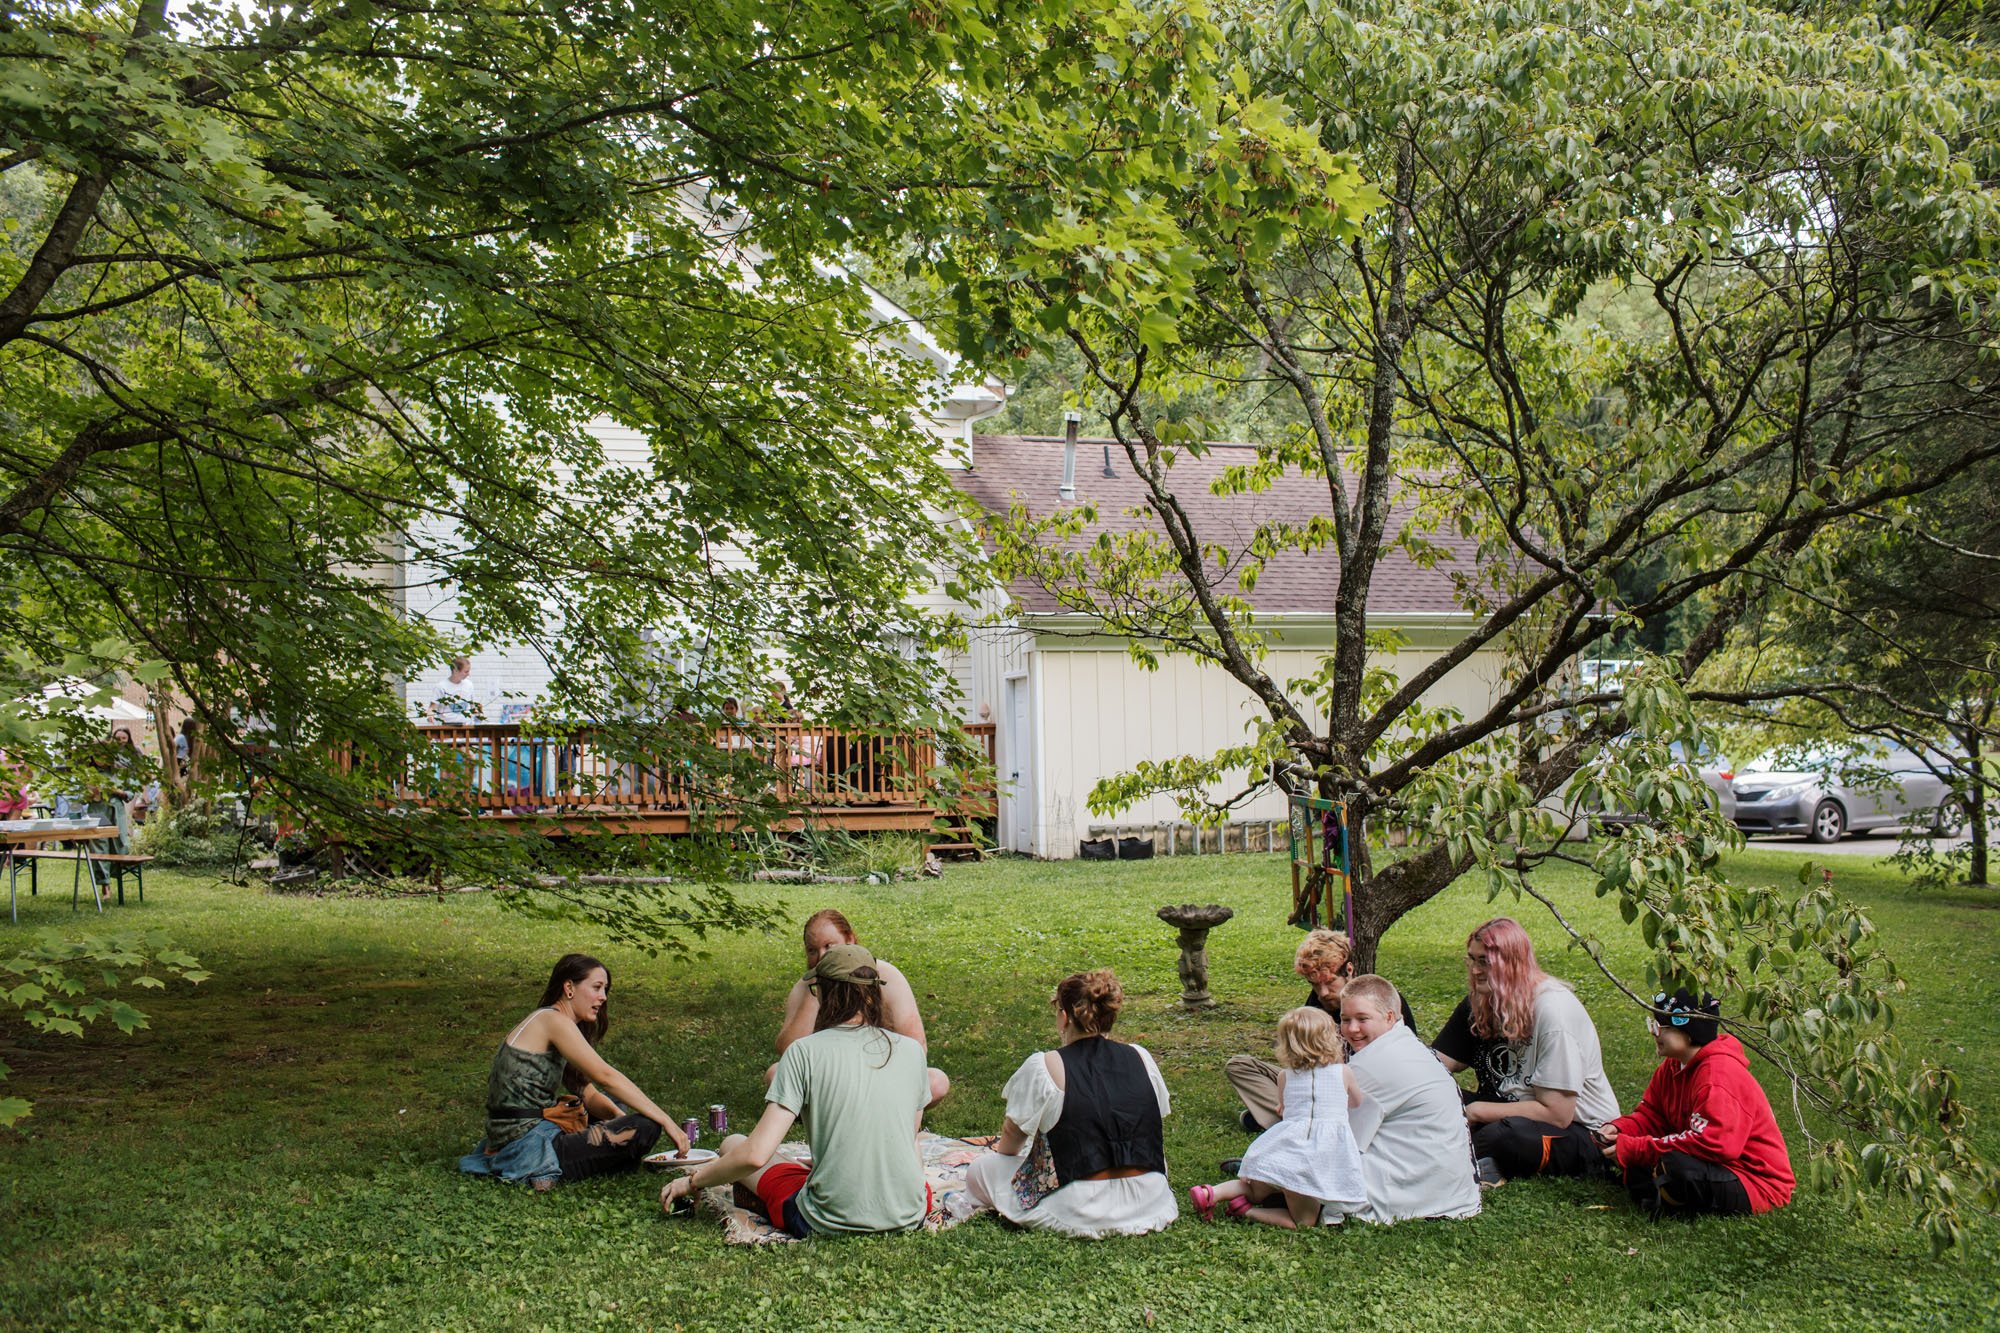 The lawn became a space for conversation and community.